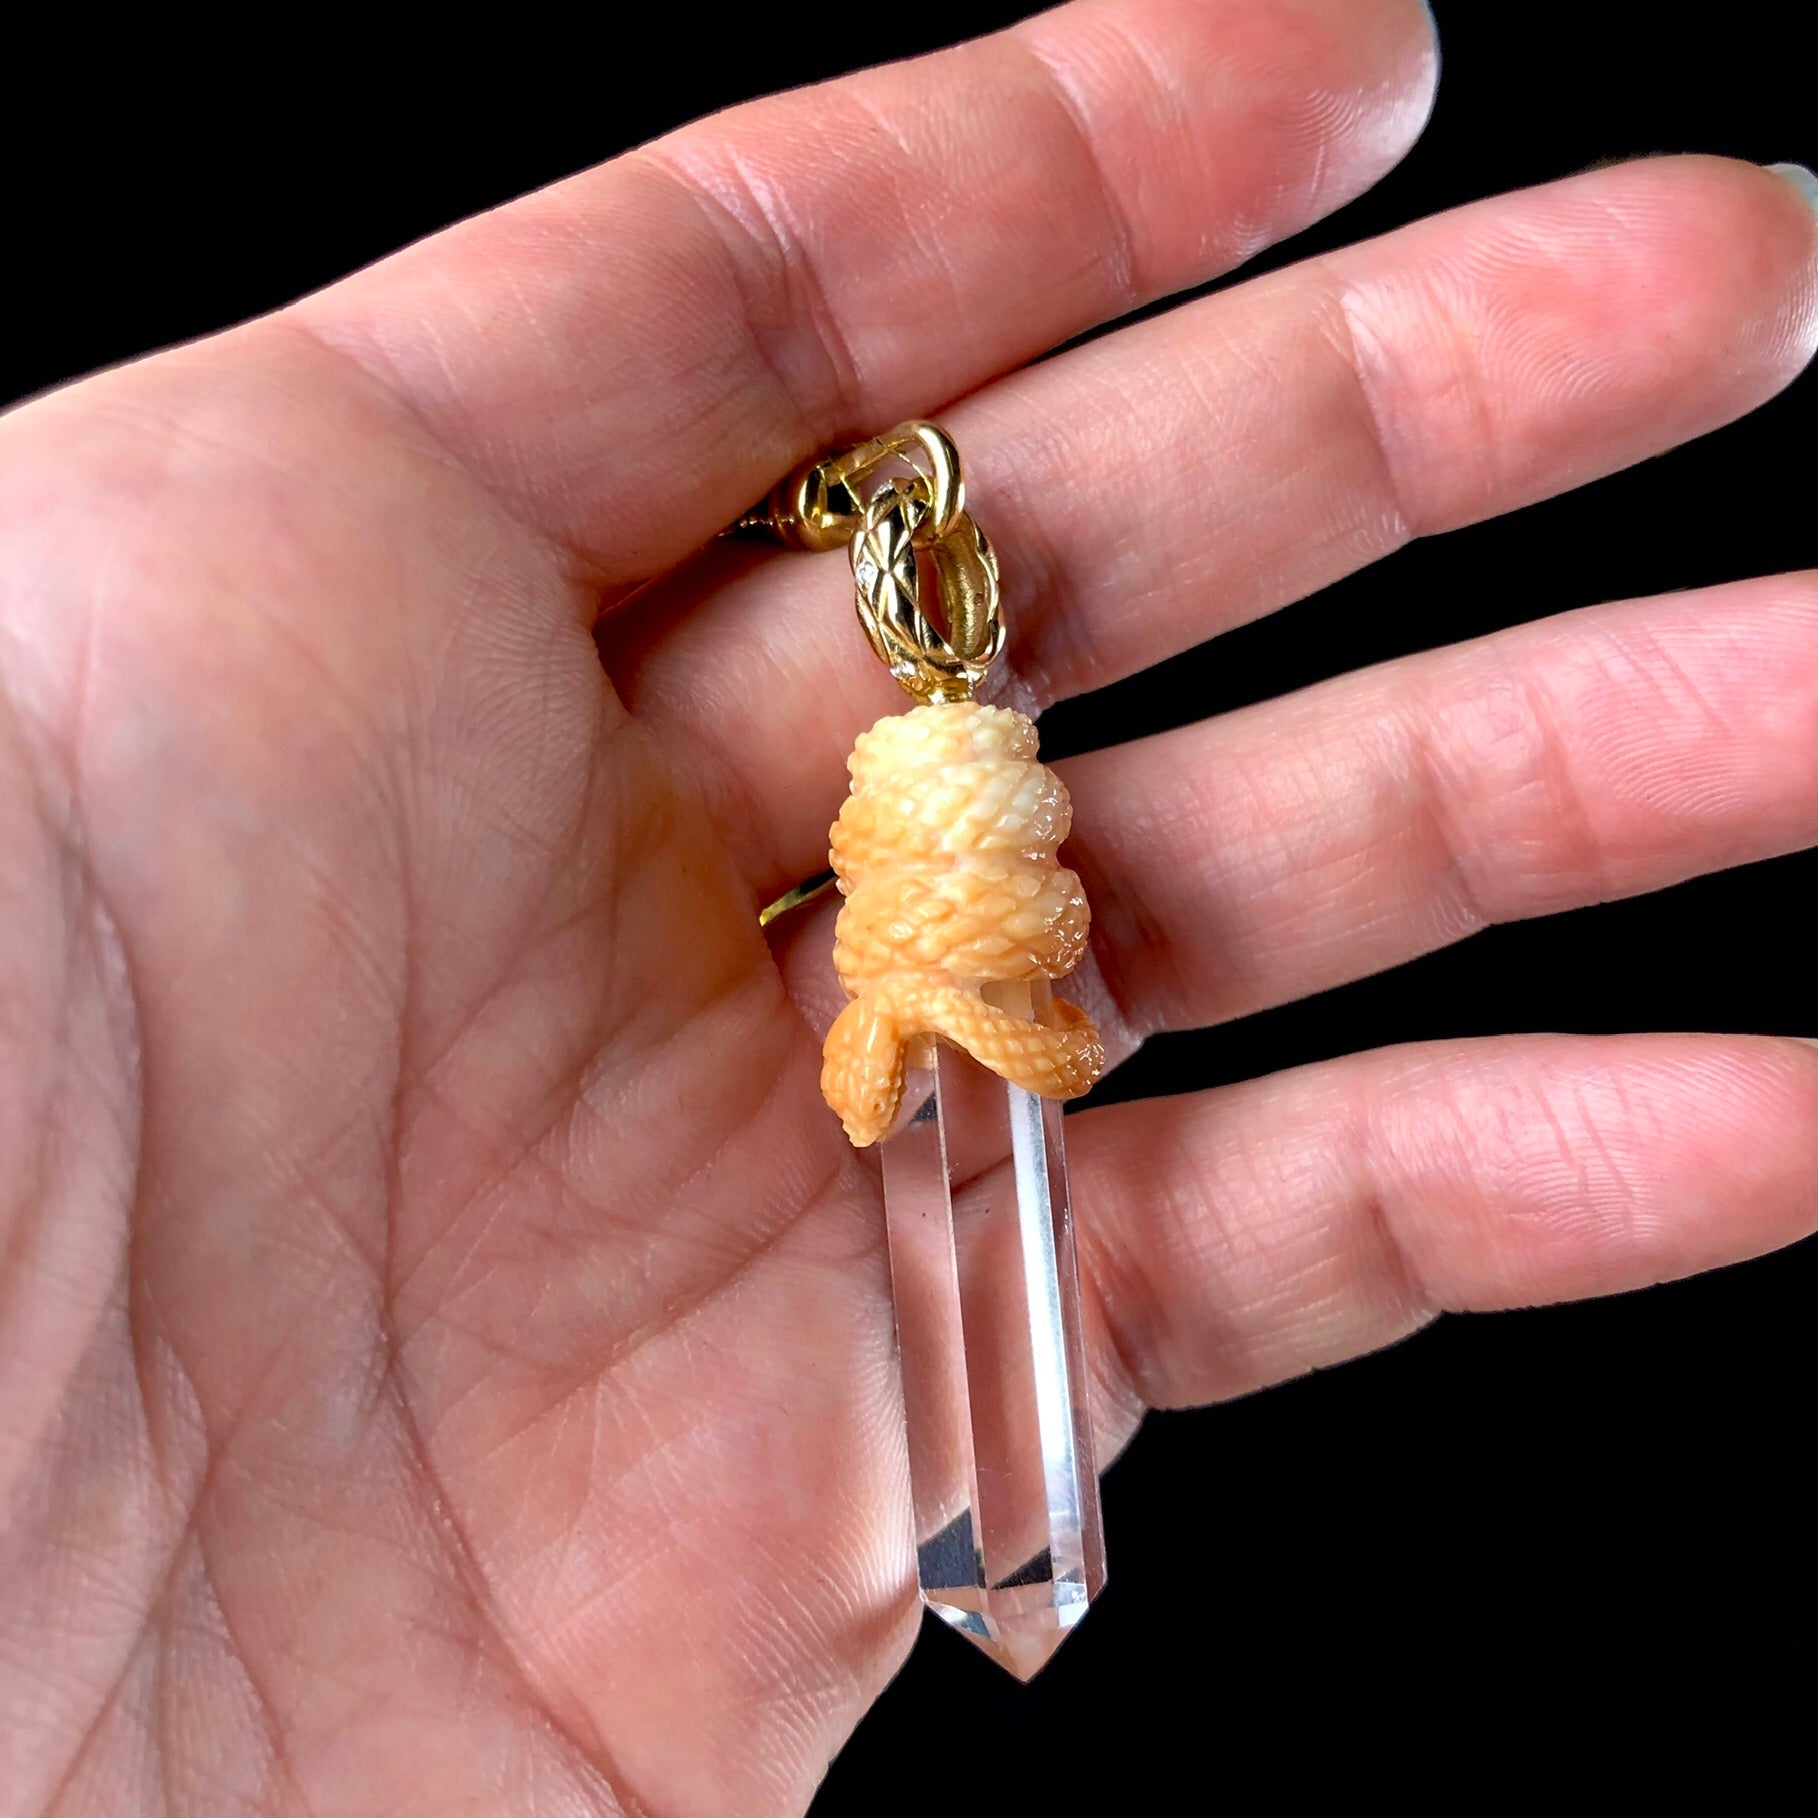 Clear crystal with light orange snake coiled about its top with gold bail shown in hand